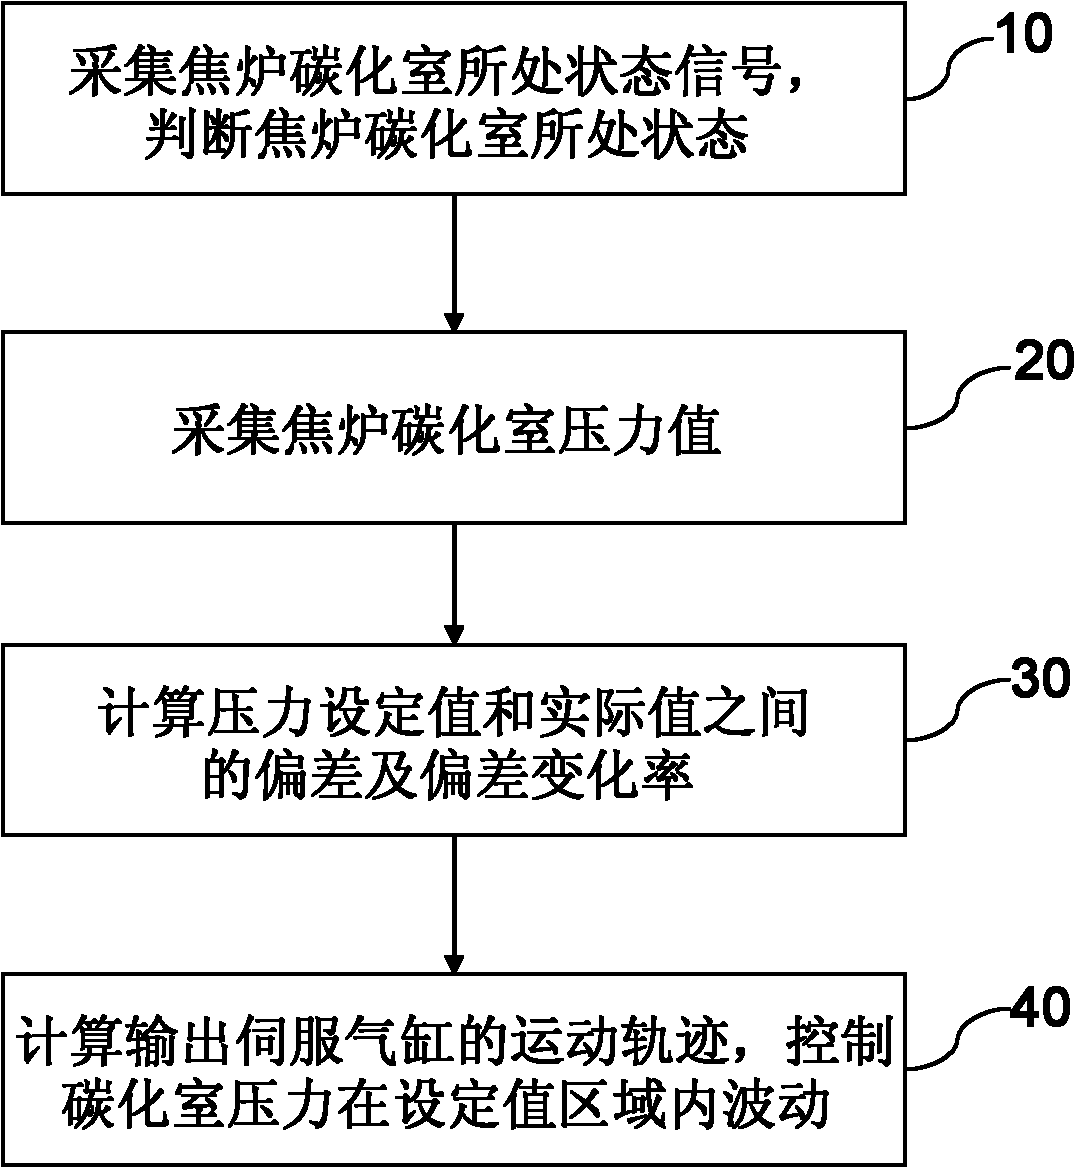 Pressure regulating device for coke oven carbonization chamber and fuzzy control method thereof